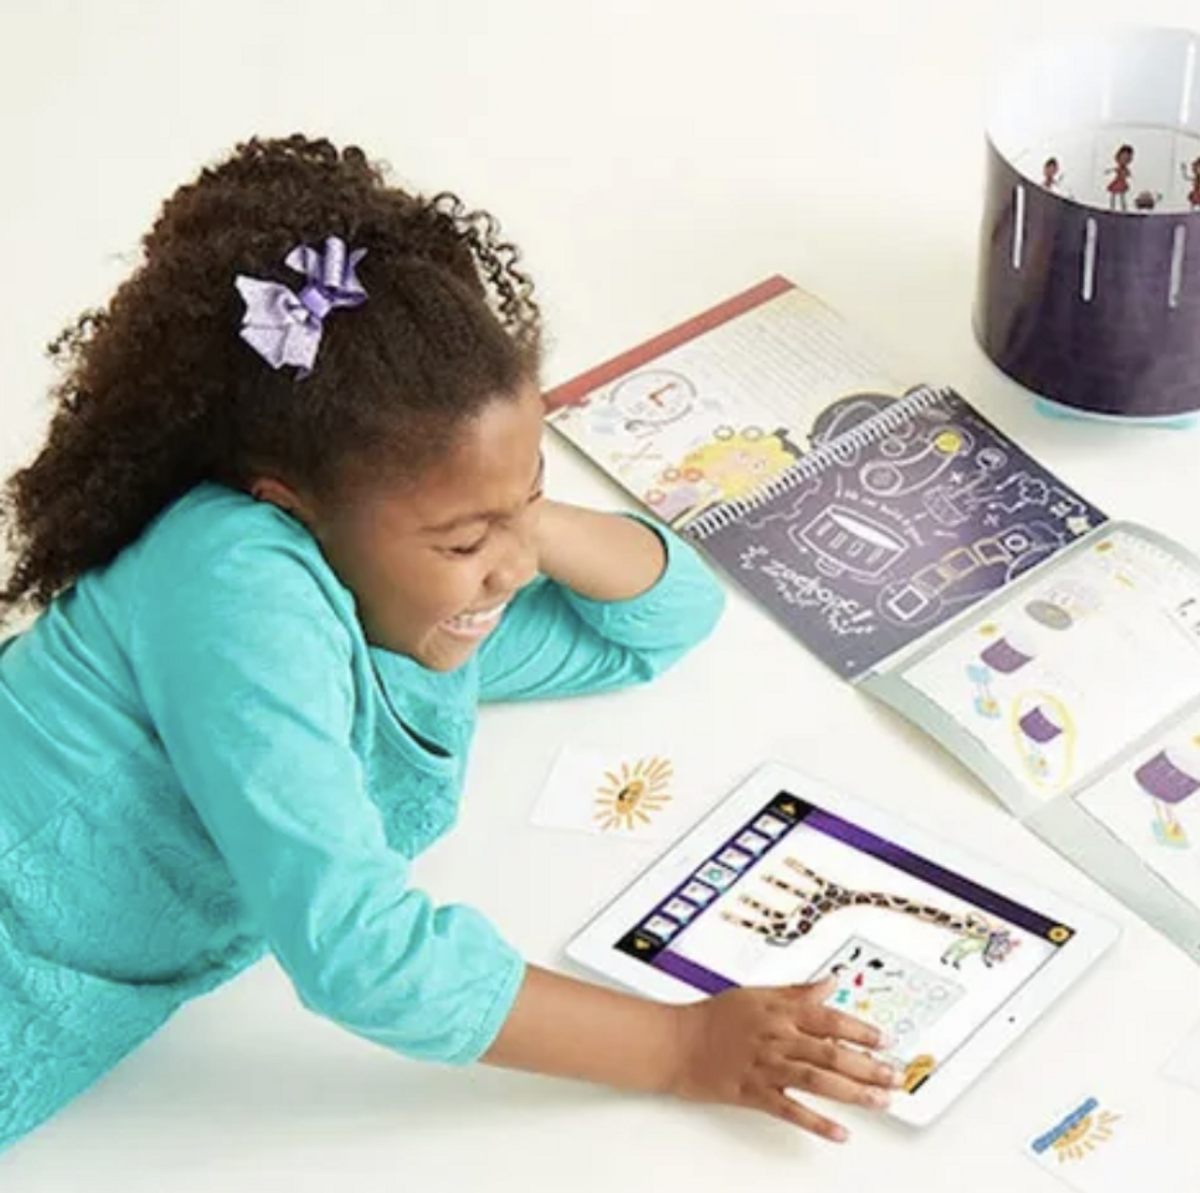 45+ Free Online Resources to Keep Kids Busy, Happy, and Learning at Home